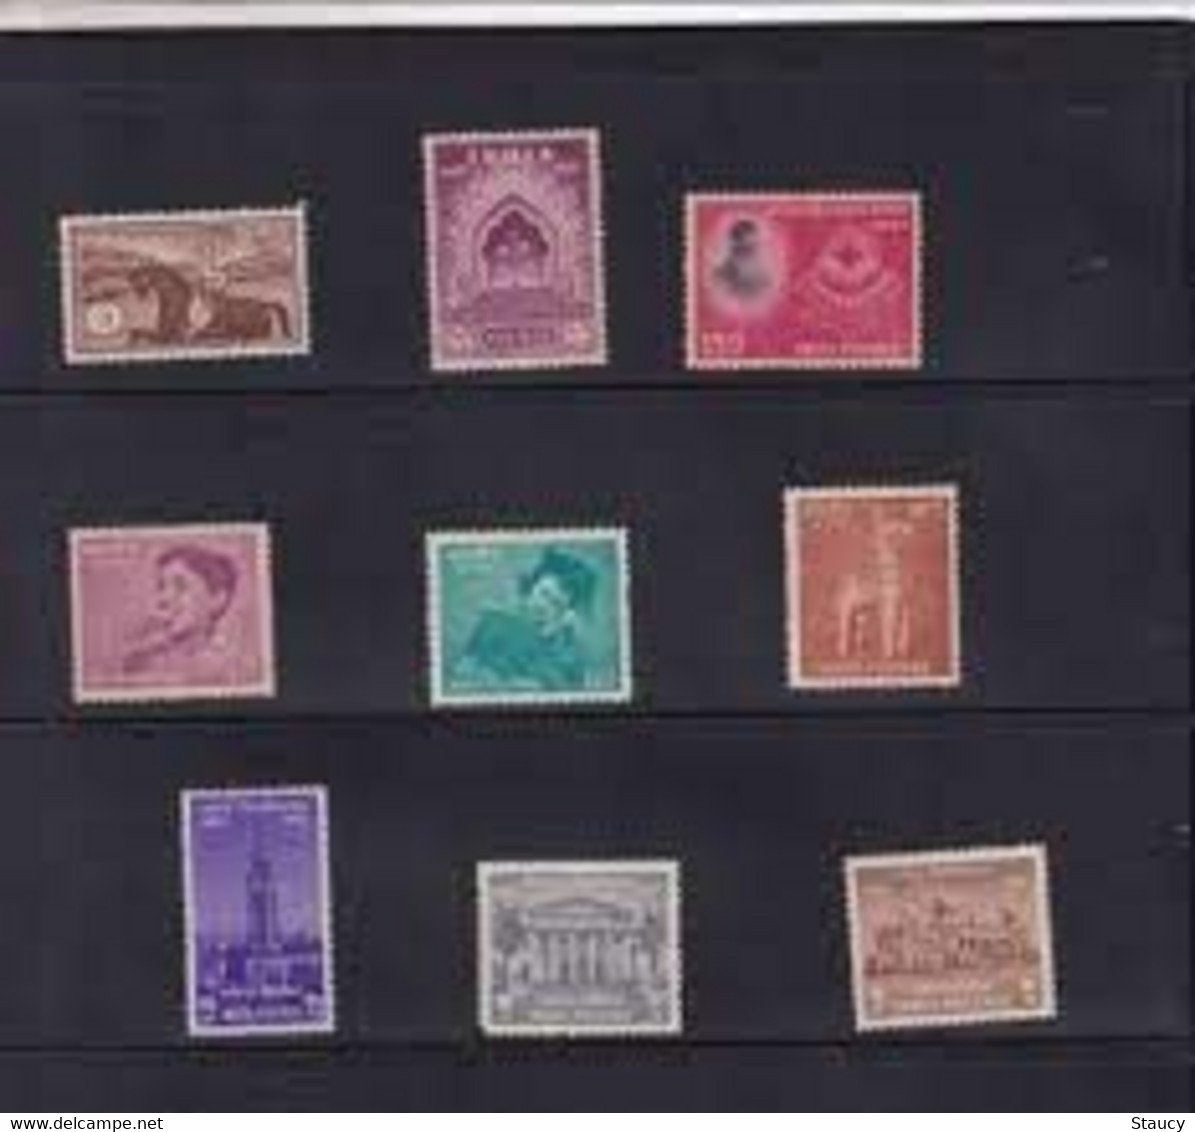 India 1957 Complete Year Pack / Set / Collection Total 9 Stamps (No Missing) MNH As Per Scan - Años Completos